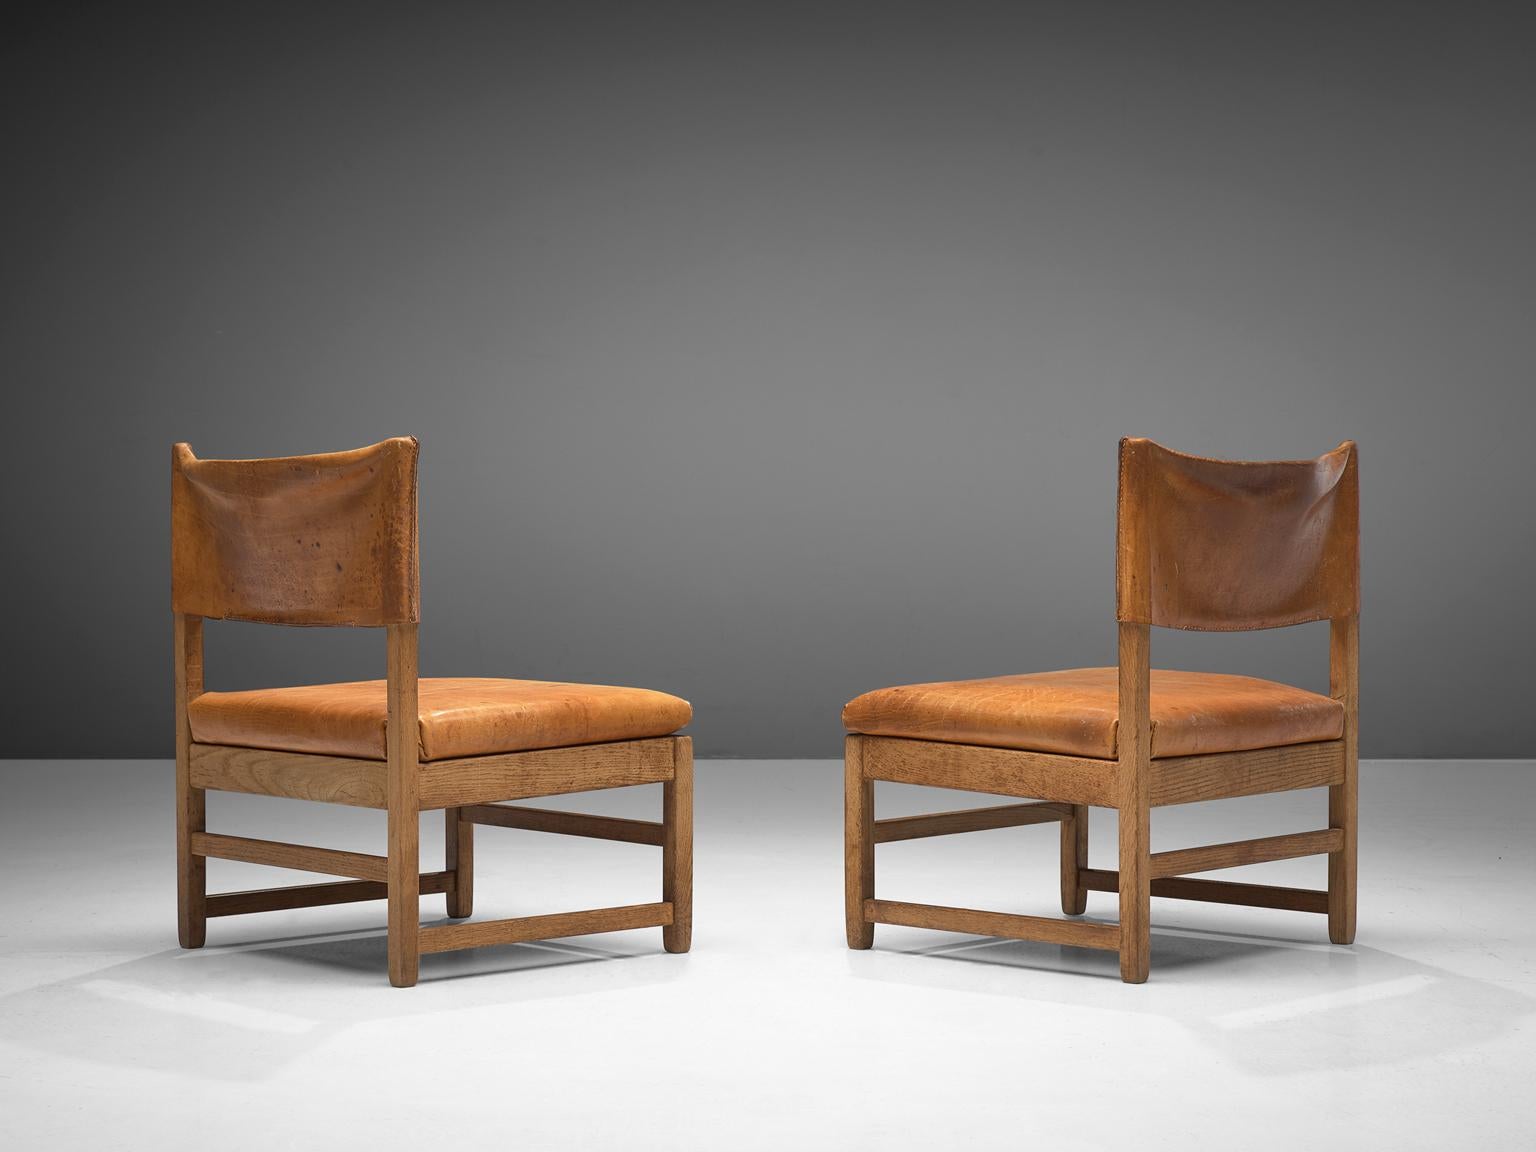 Grand lounge chairs, oak and cognac leather, France, 1960s

Wonderful set of two lounge chairs is designed in Scandinavia, made in solid oak are upholstered with cognac saddle leather. This set has a wonderful rich patina that makes this set